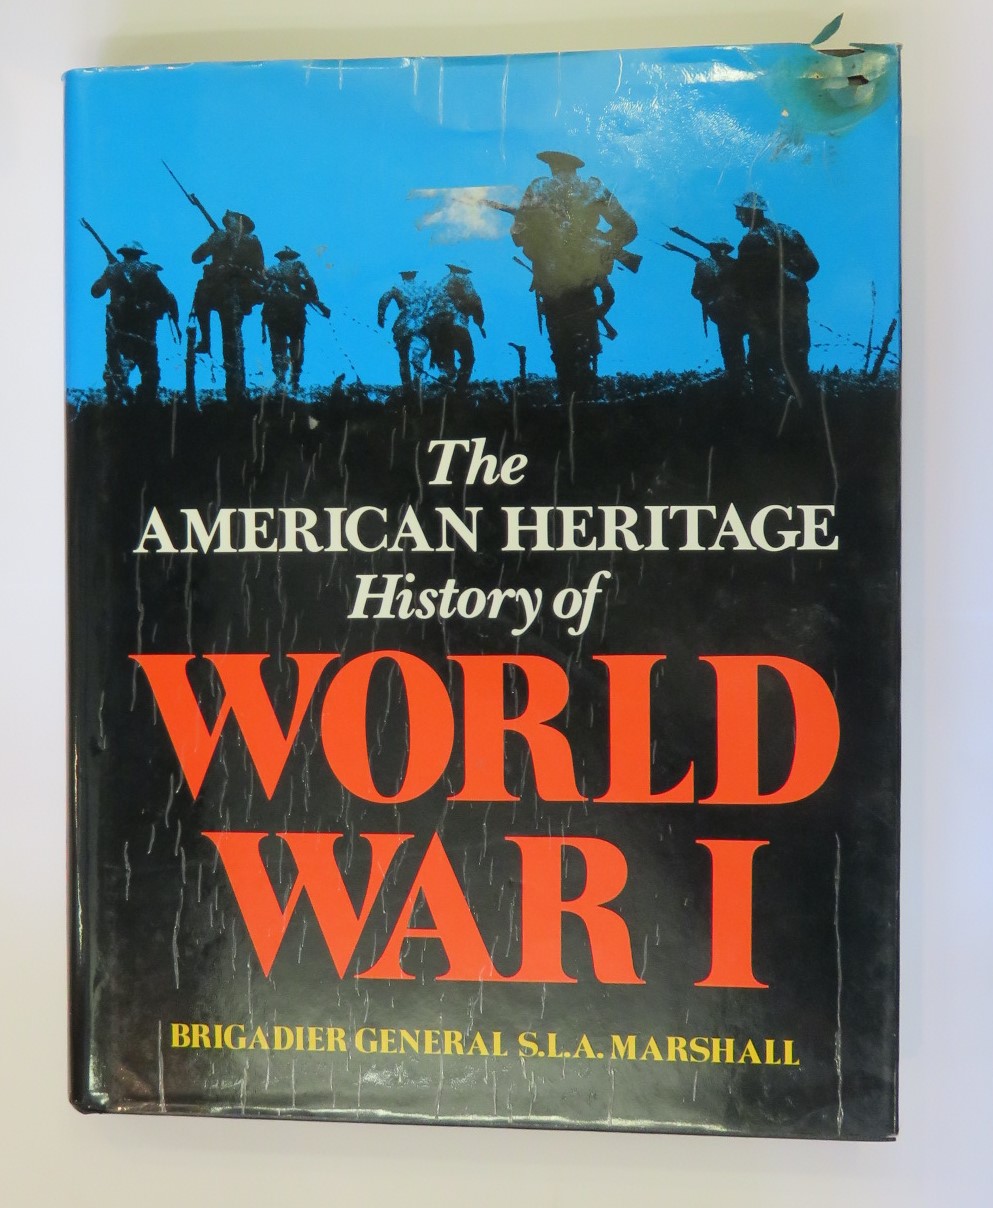 The American Heritage History of World War 1